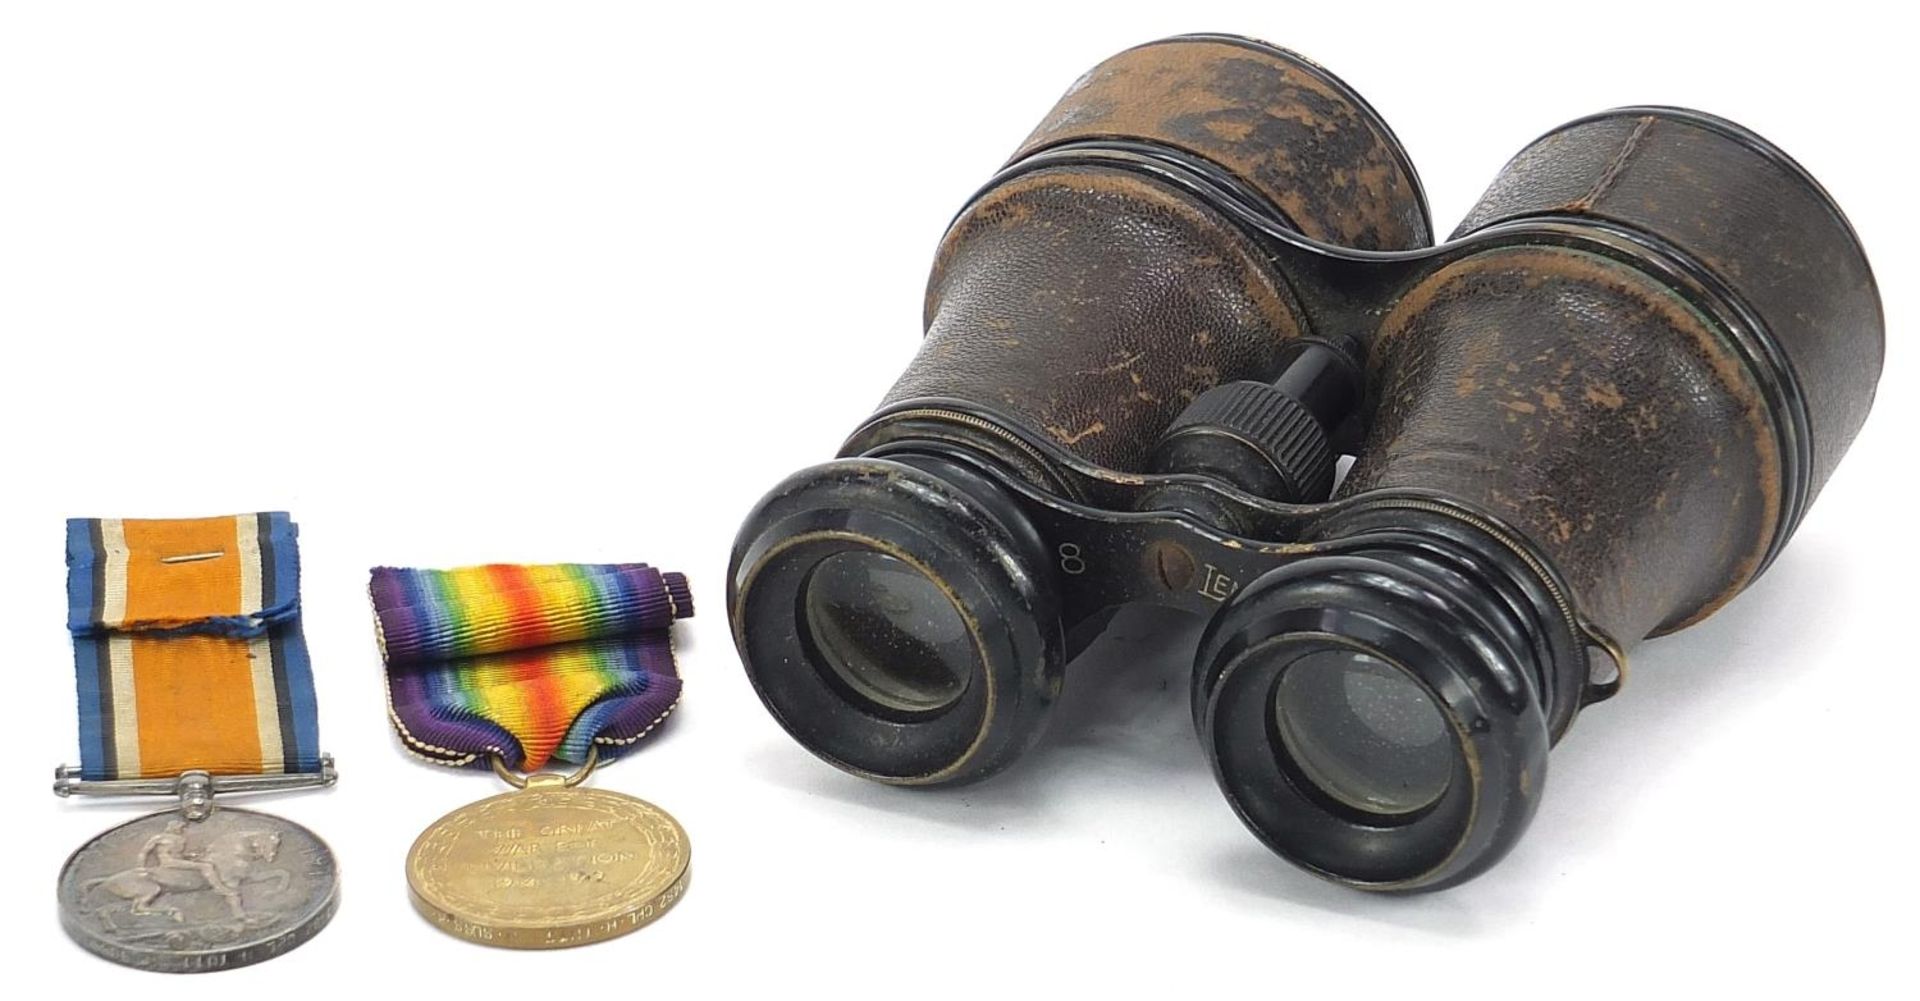 British military World War I pair and leather bound binoculars, the pair awarded to 1482CPL.H.TUTT. - Image 4 of 8